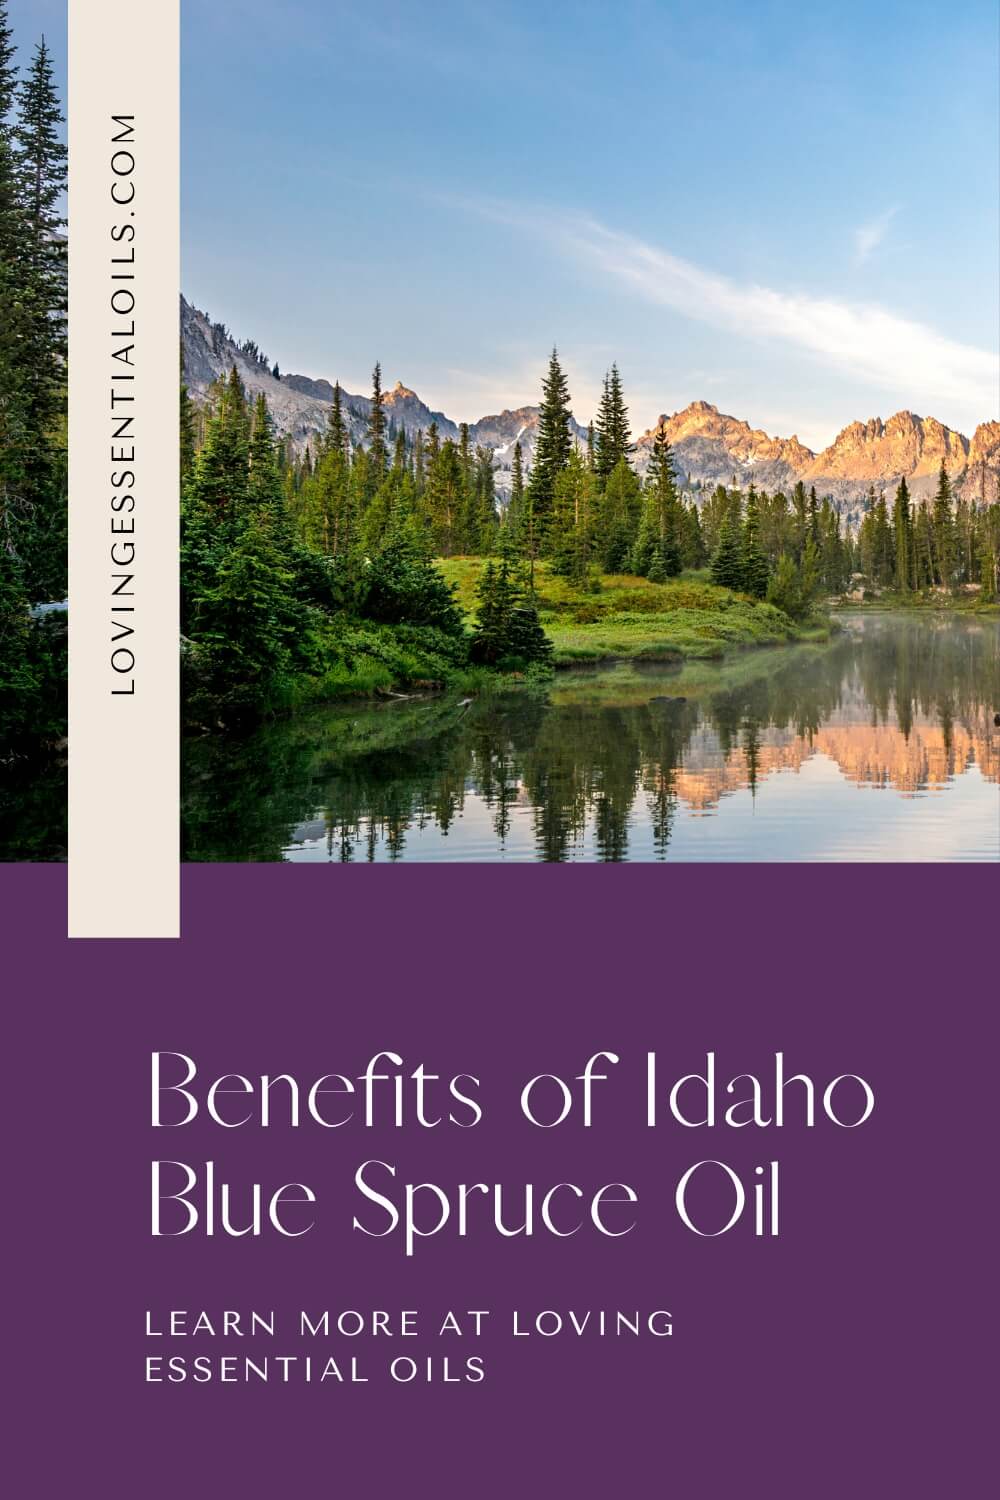 Benefits of Idaho Blue Spruce Oil by Loving Essential Oils